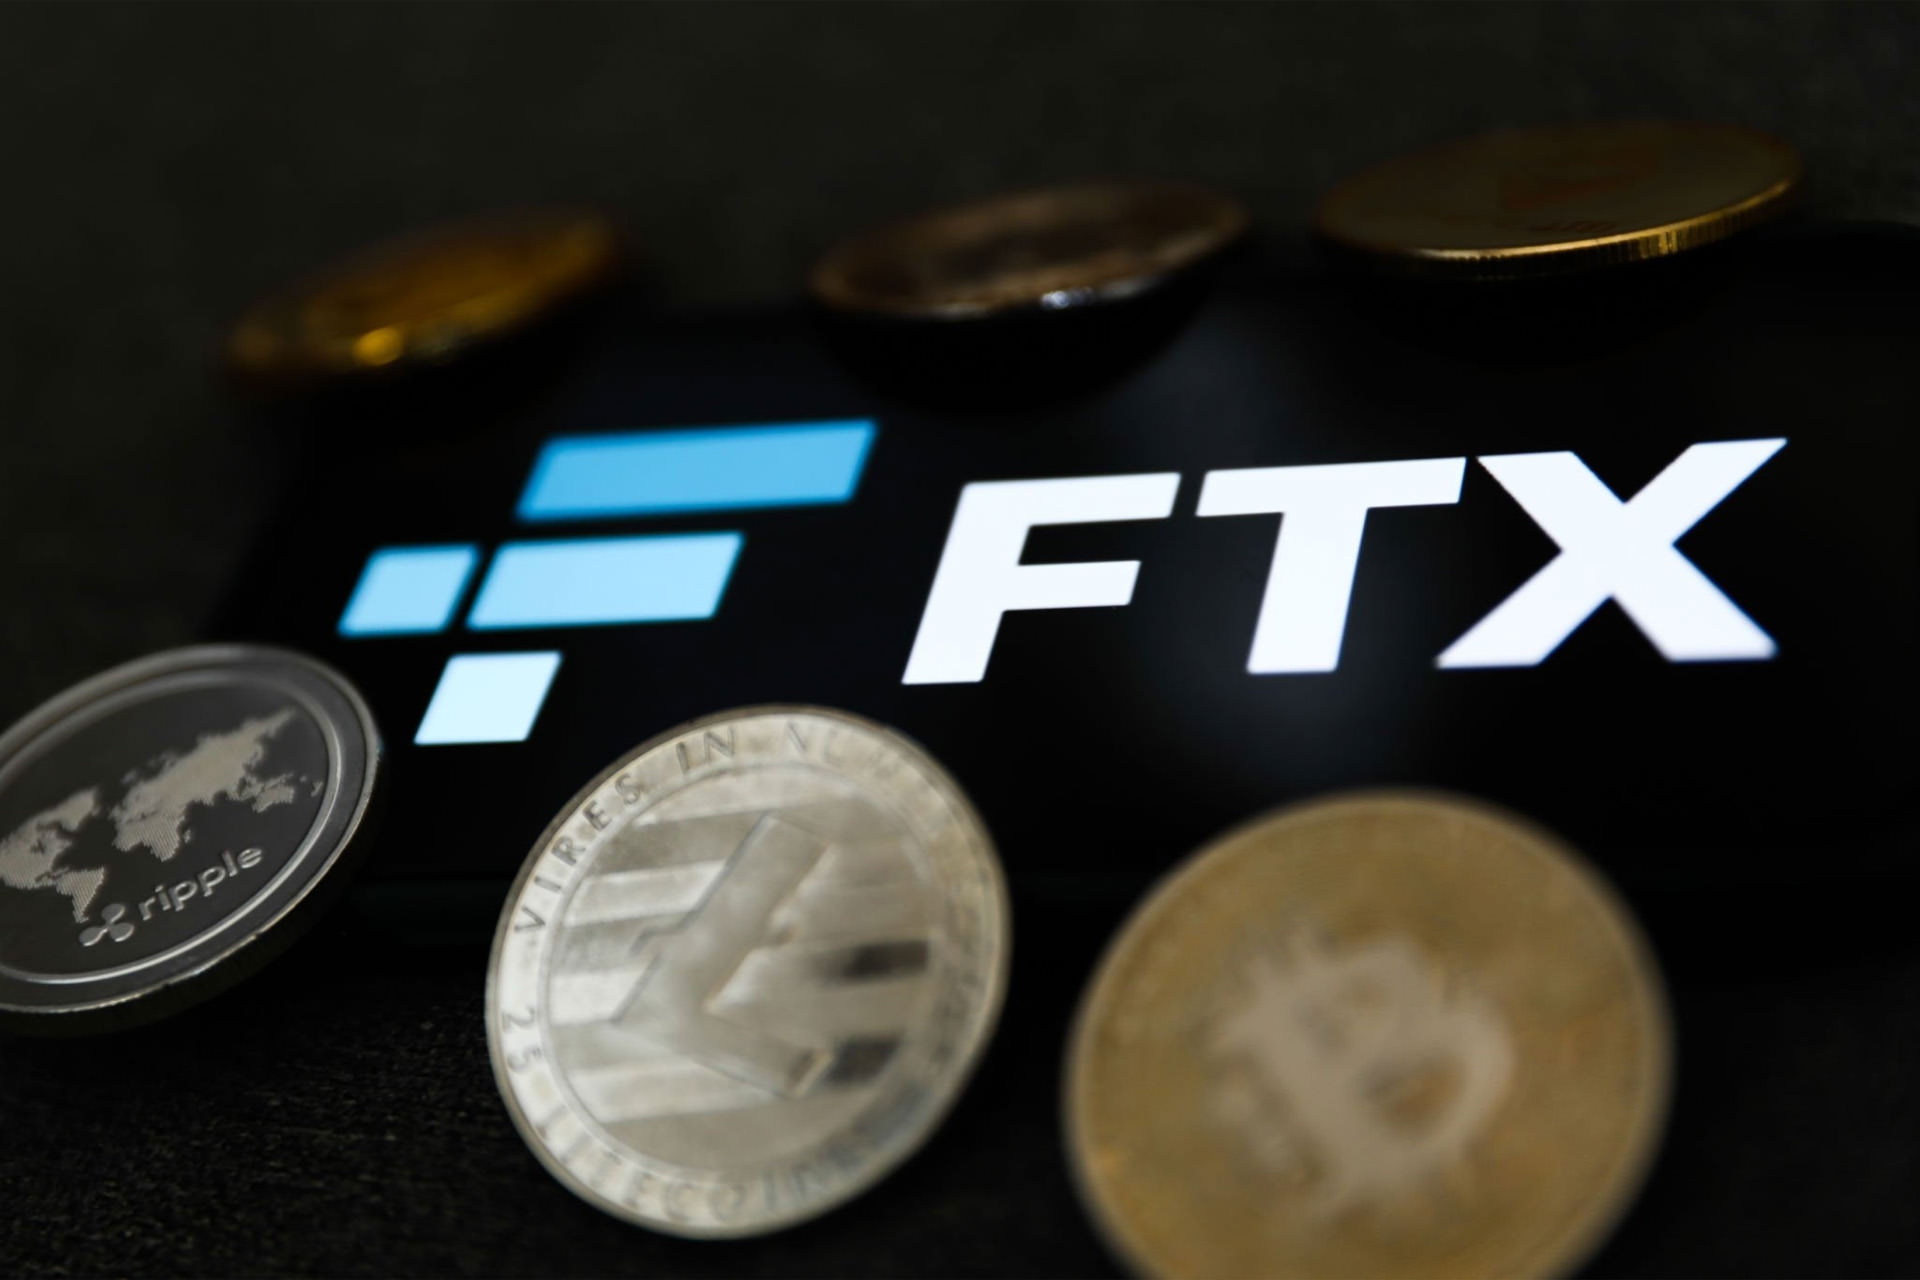 ftx cryptocurrency exchange logo coin